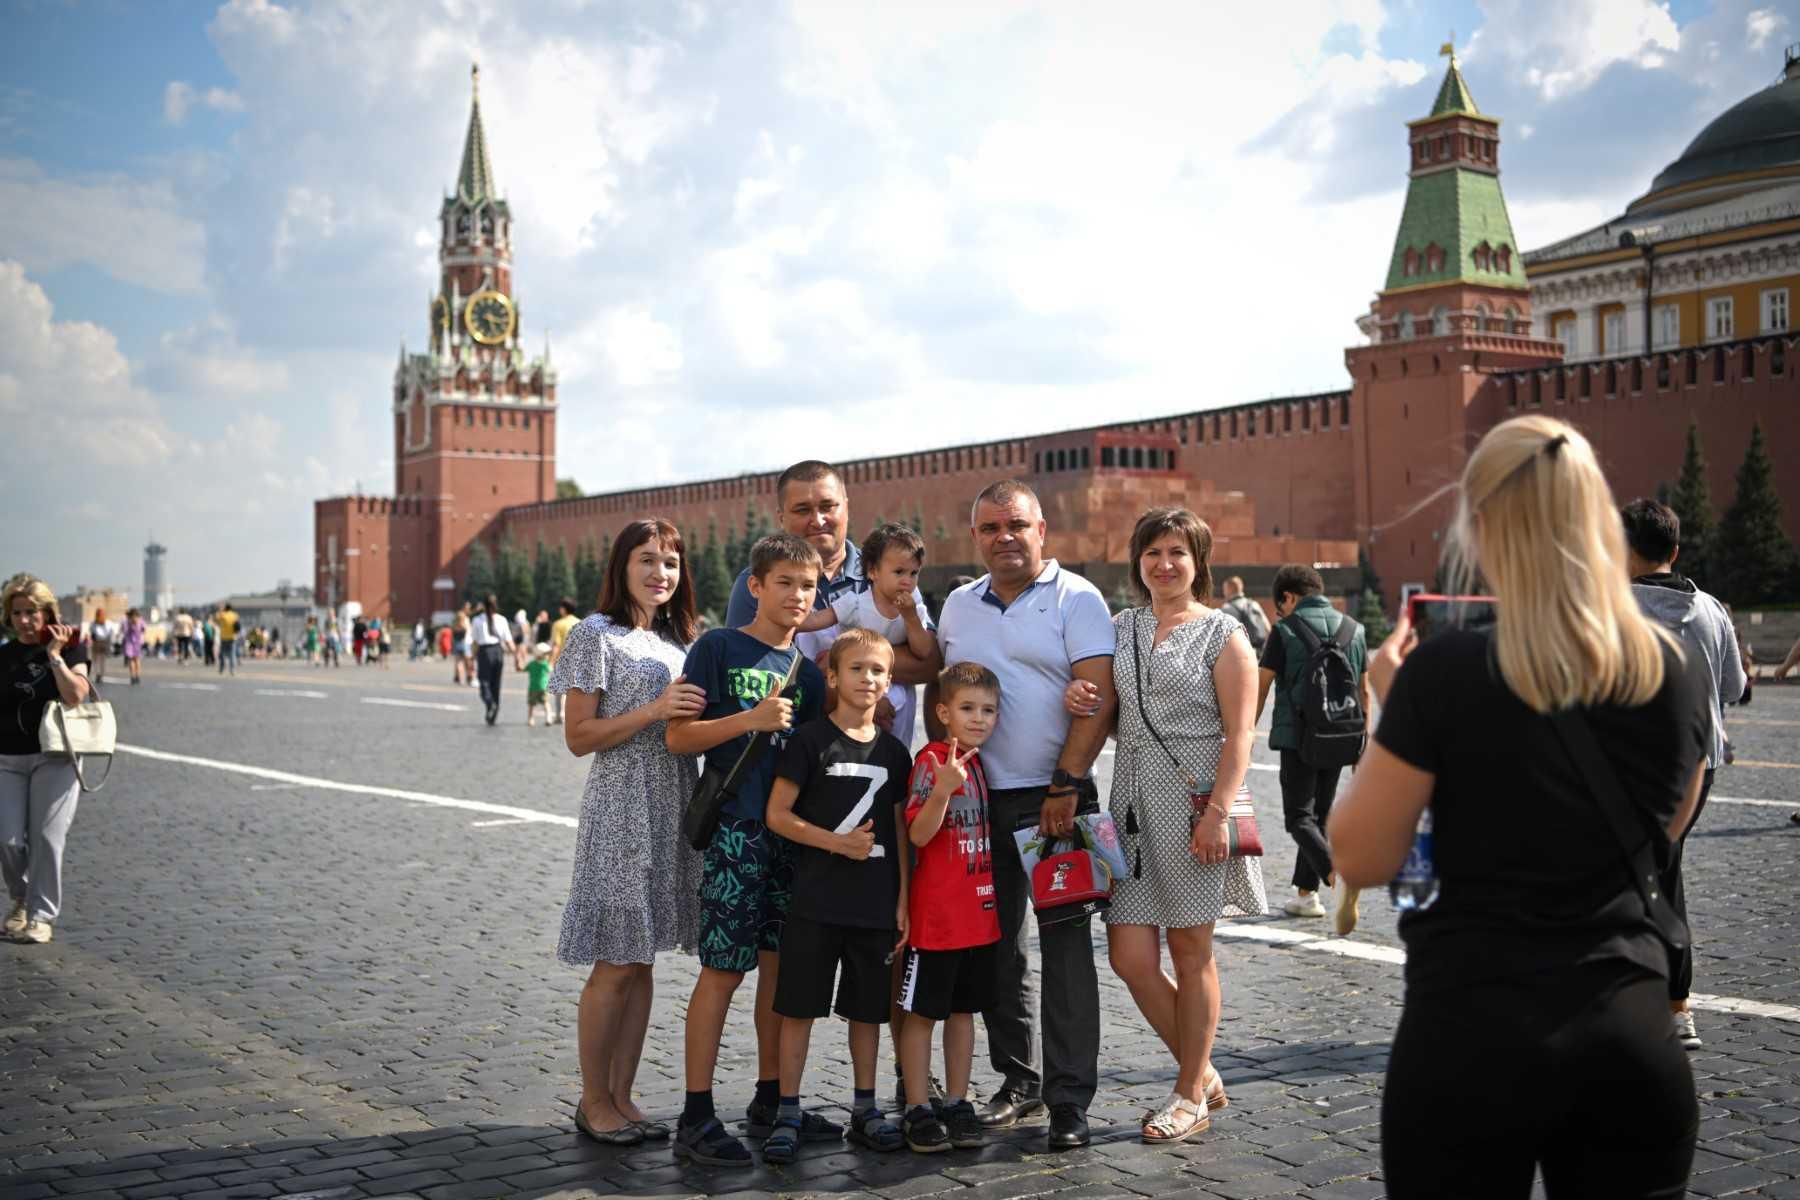 A group of people, including a boy wearing a T-shirt with the letter Z, which has become a symbol of support for Russian military action in Ukraine, poses for pictures on Red Square in downtown Moscow on July 25. Photo: AFP 